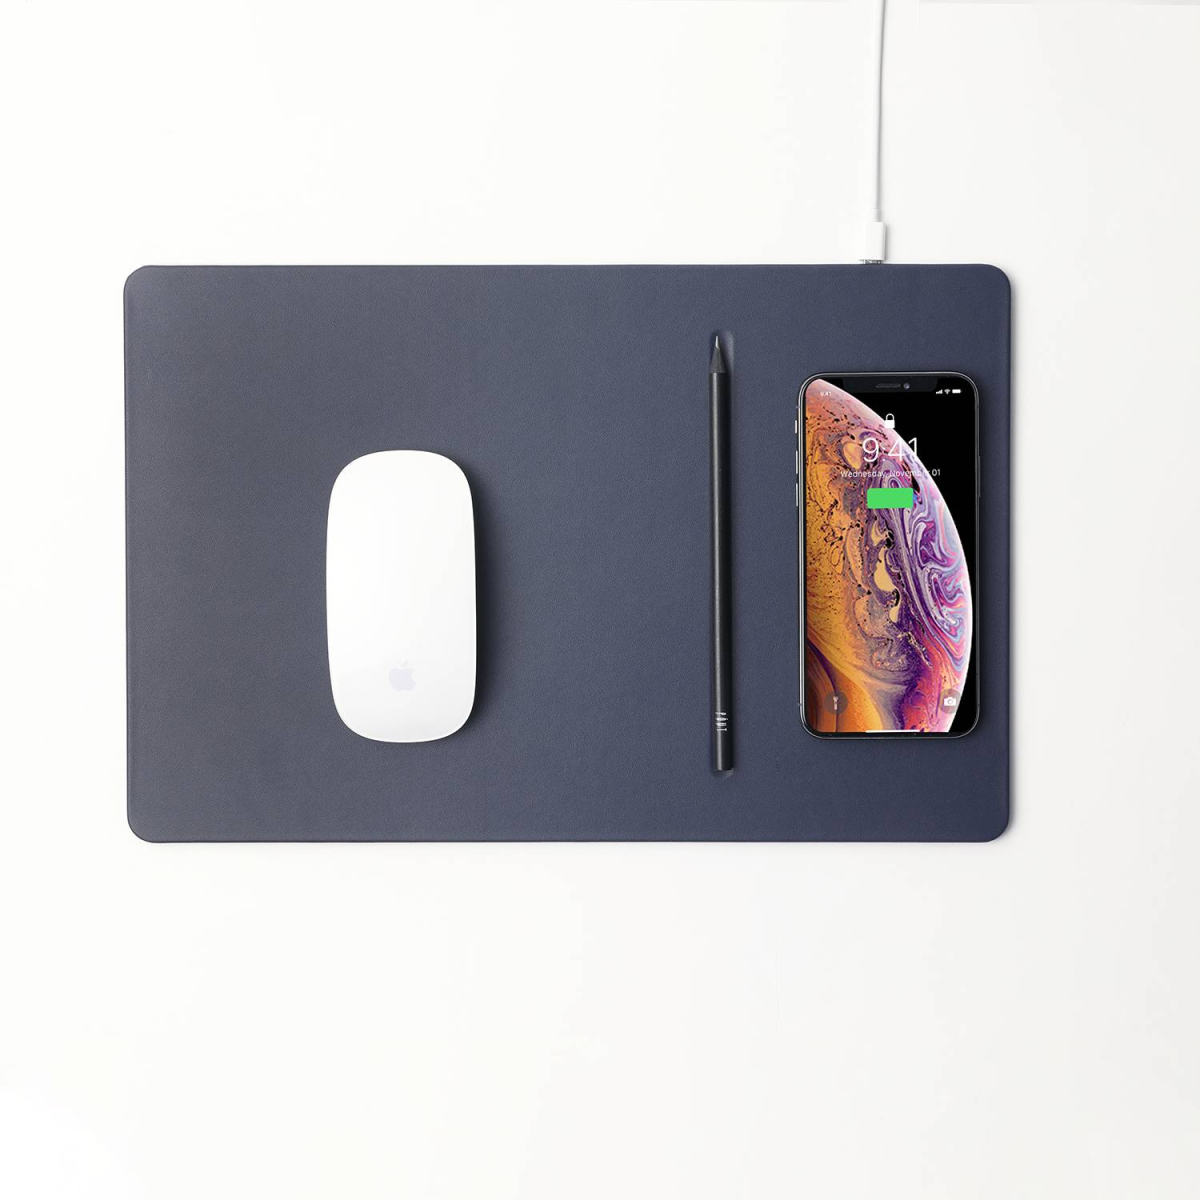 POUT - HANDS3 PRO / Mouse pad / Wireless charger / Desk organizer 